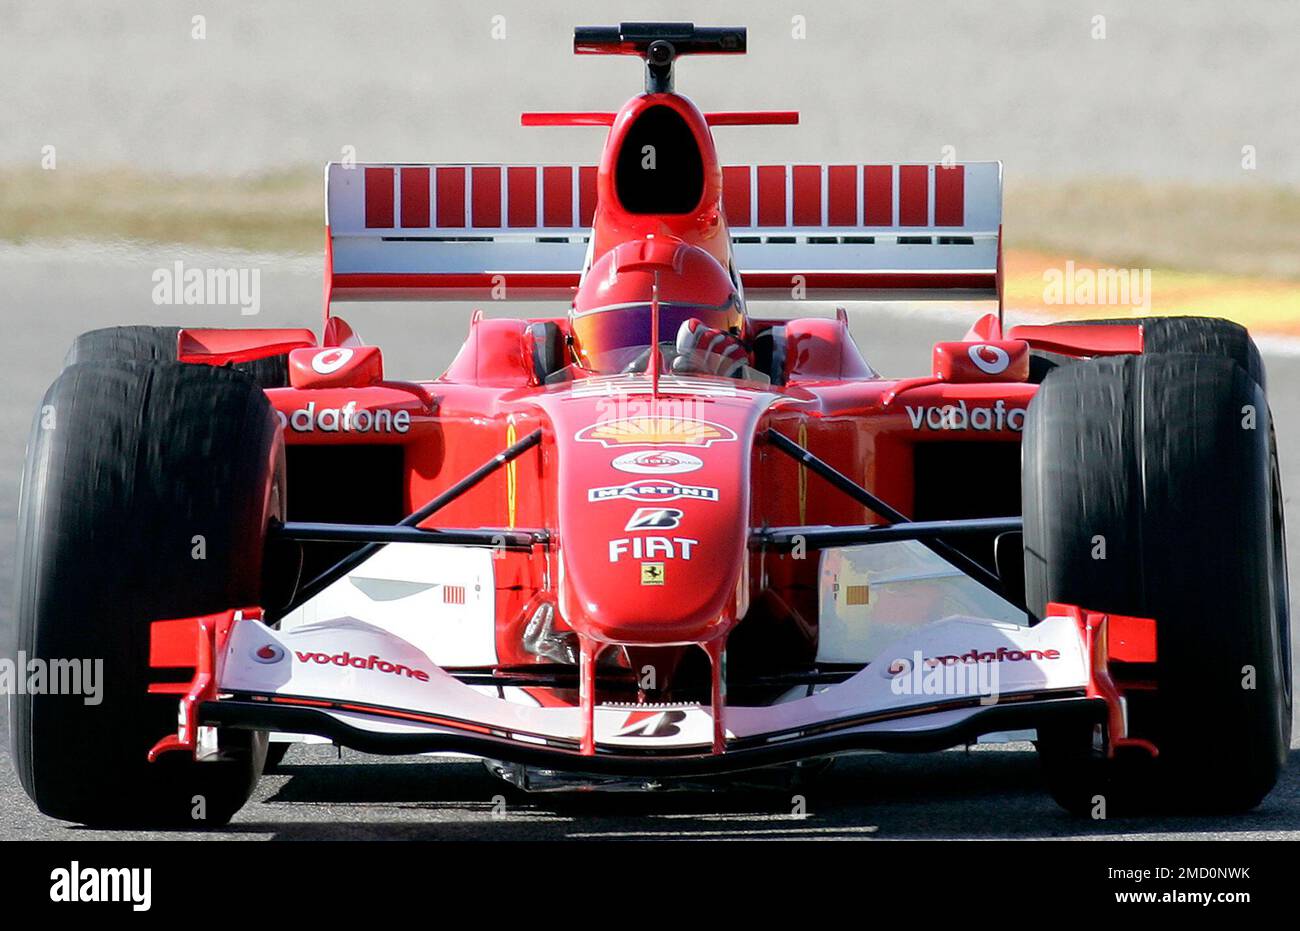 Italian Moto GP motorcycle World champion Valentino Rossi drives a Ferrari  Formula One car during a F1 motor racing test session at the Cheste's  racetrack near Valencia, Spain, on Feb.1, 2006. Rossi